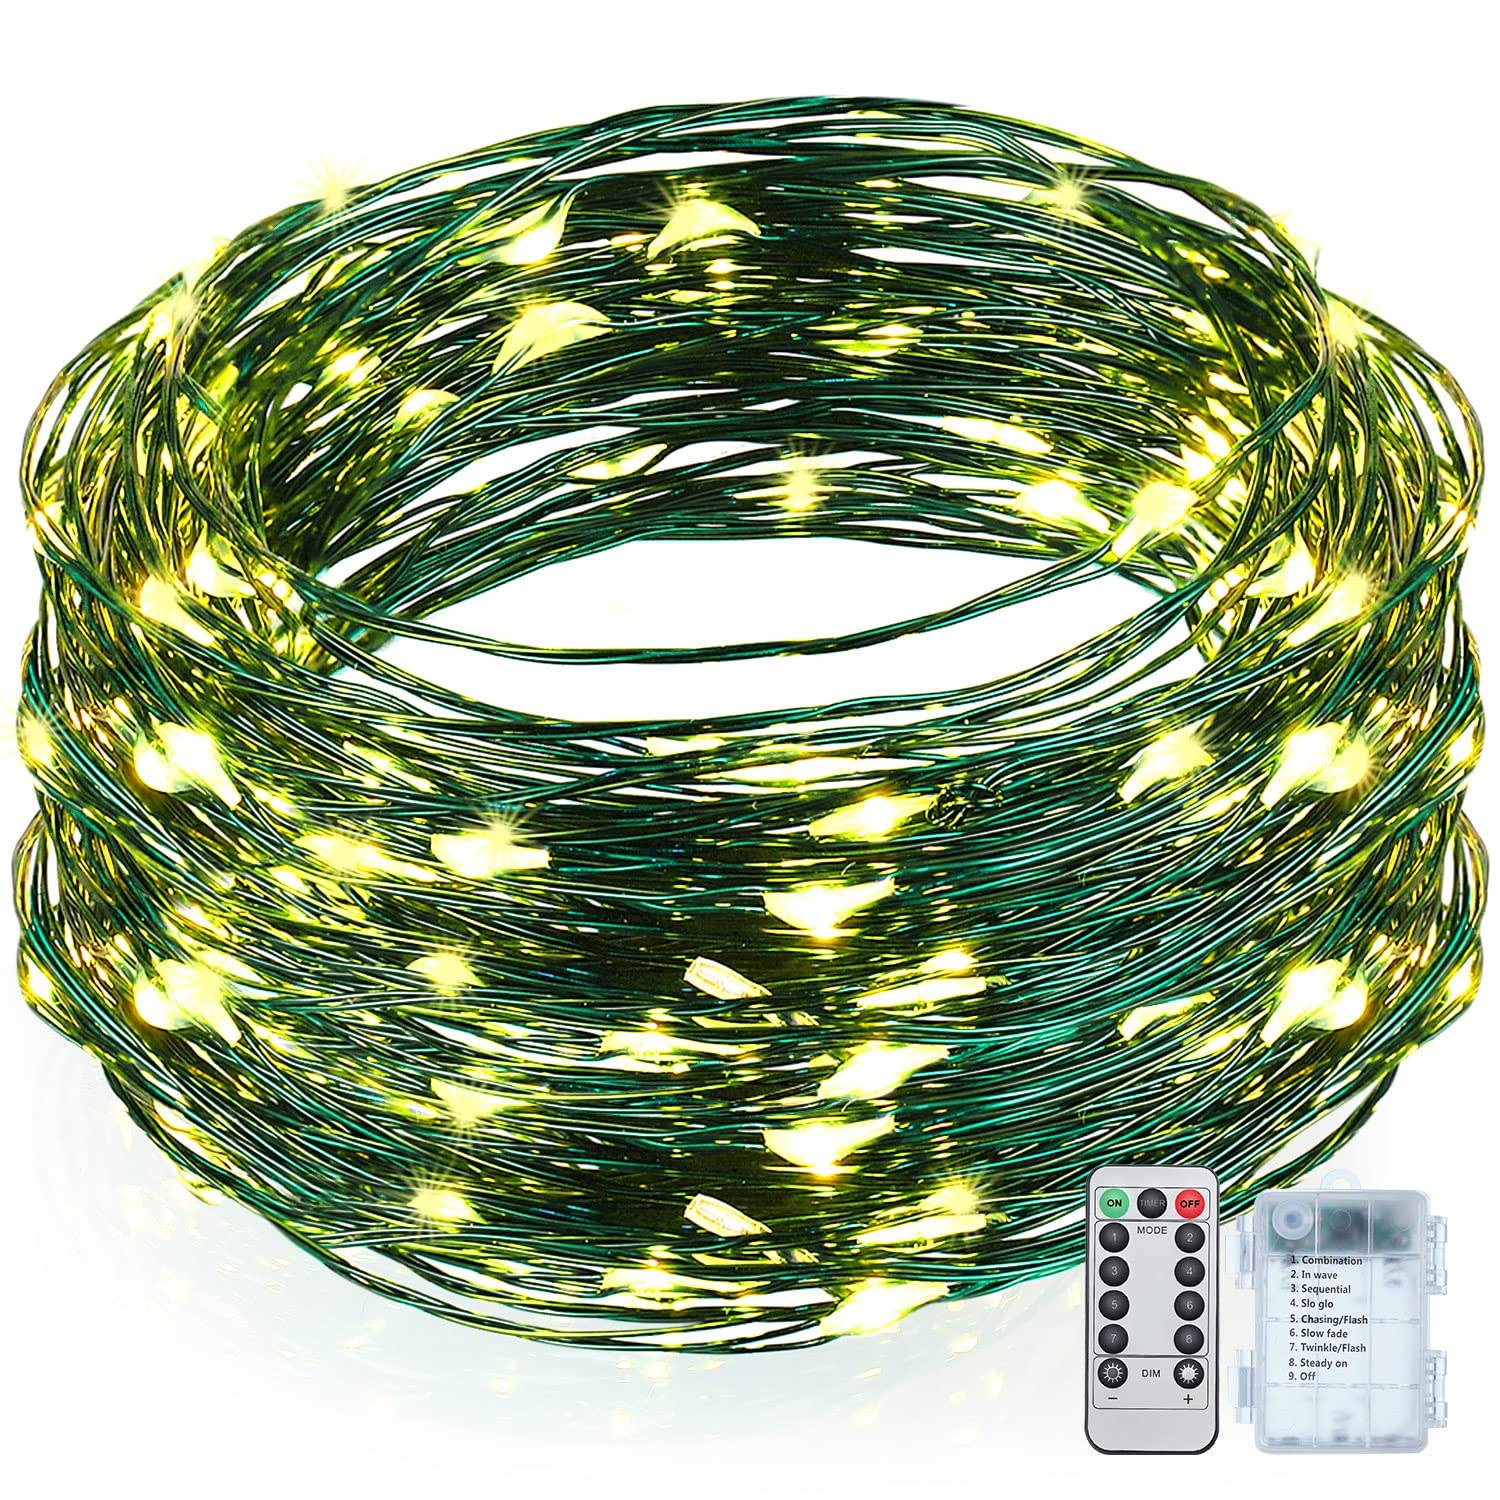 Remagr 4 Pcs Battery Operated String Lights Outdoor String Lights 33 ft/10 m 100 LED Warm White Wire Green Battery Operated Fairy Lights with 8 Modes for Christmas Garden Patio Tree Decorations